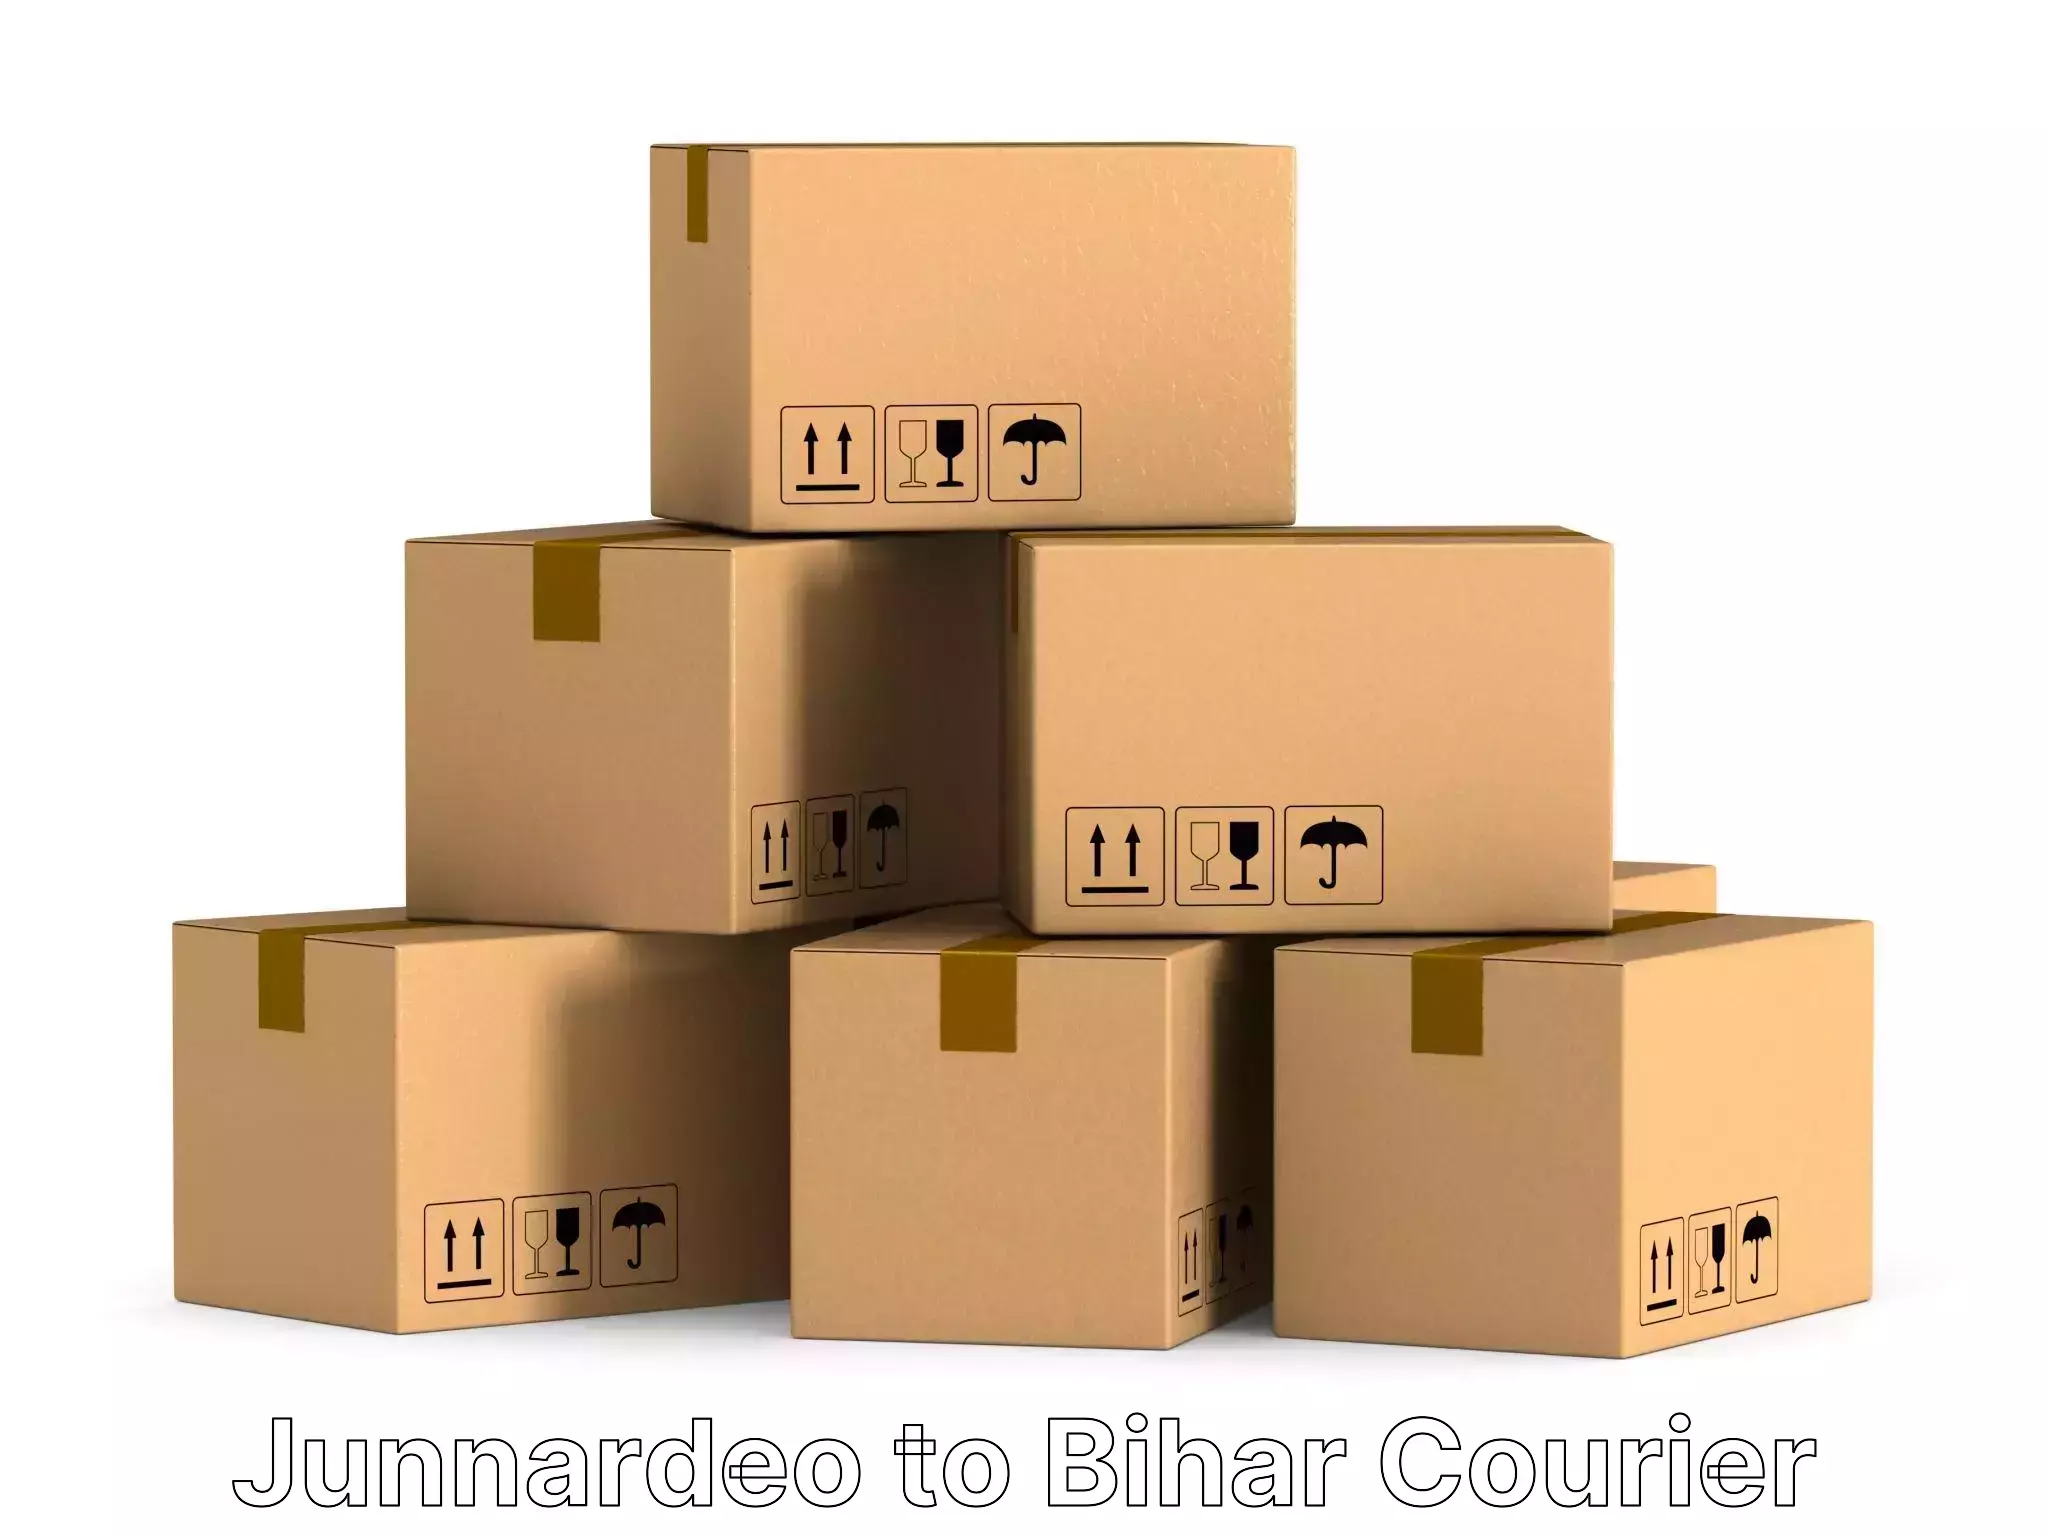 Efficient packing and moving Junnardeo to Hajipur